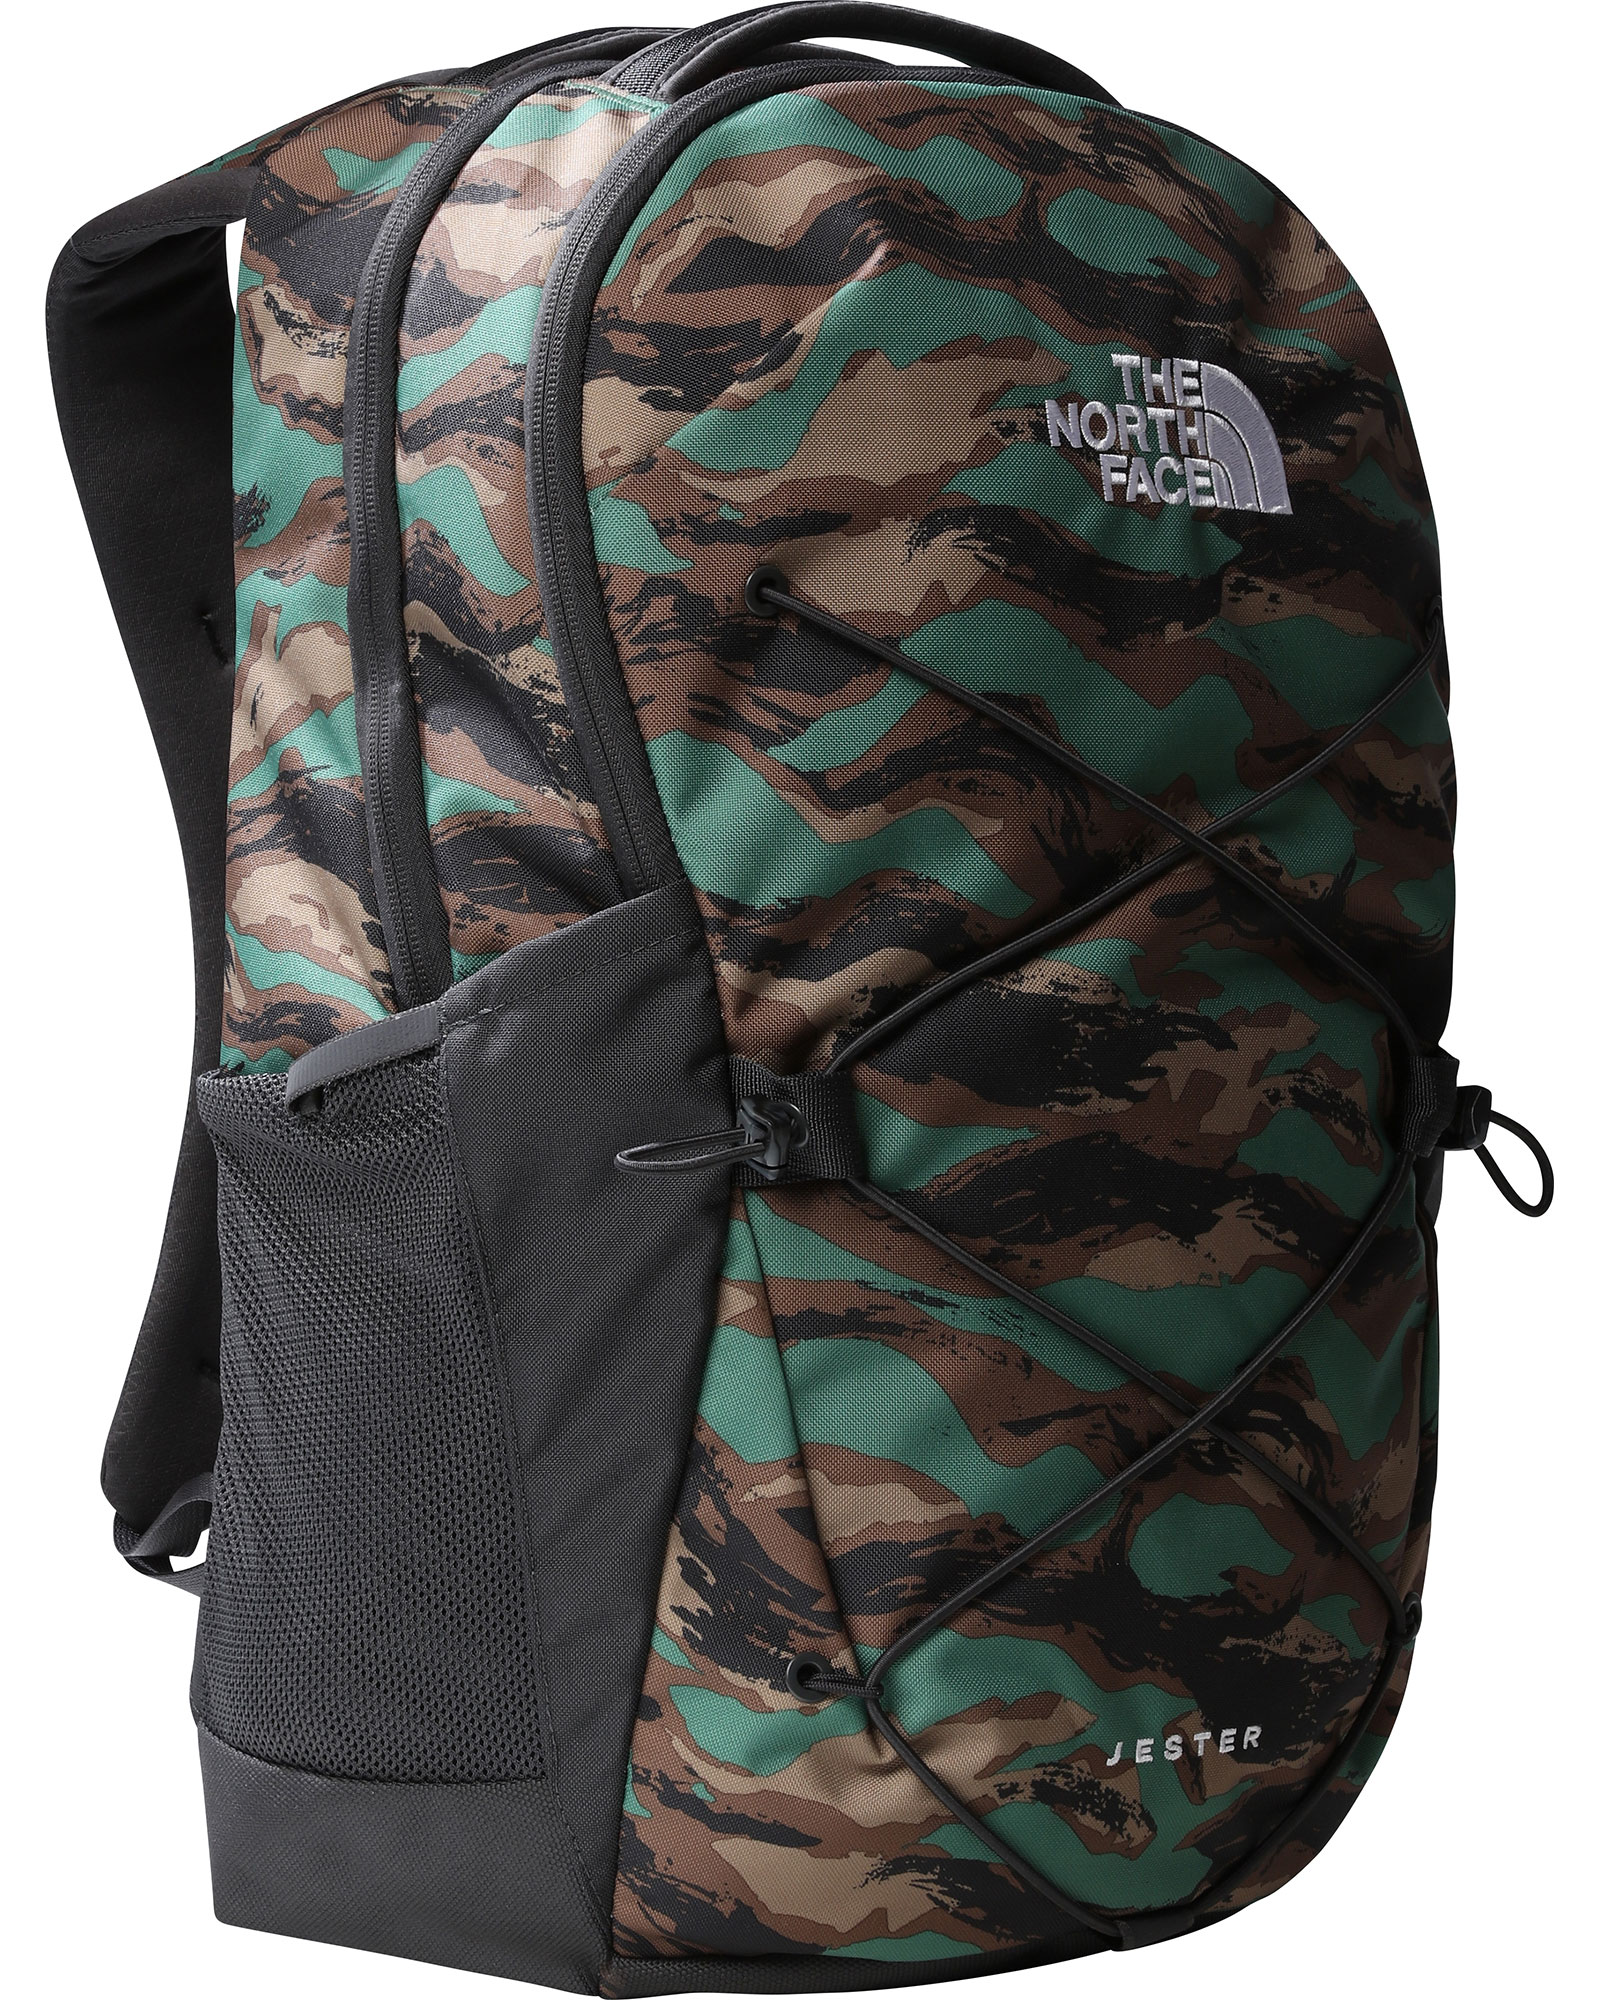 The North Face Jester Backpack - Deep Grass Green Painted Camo Print/Asphalt Grey